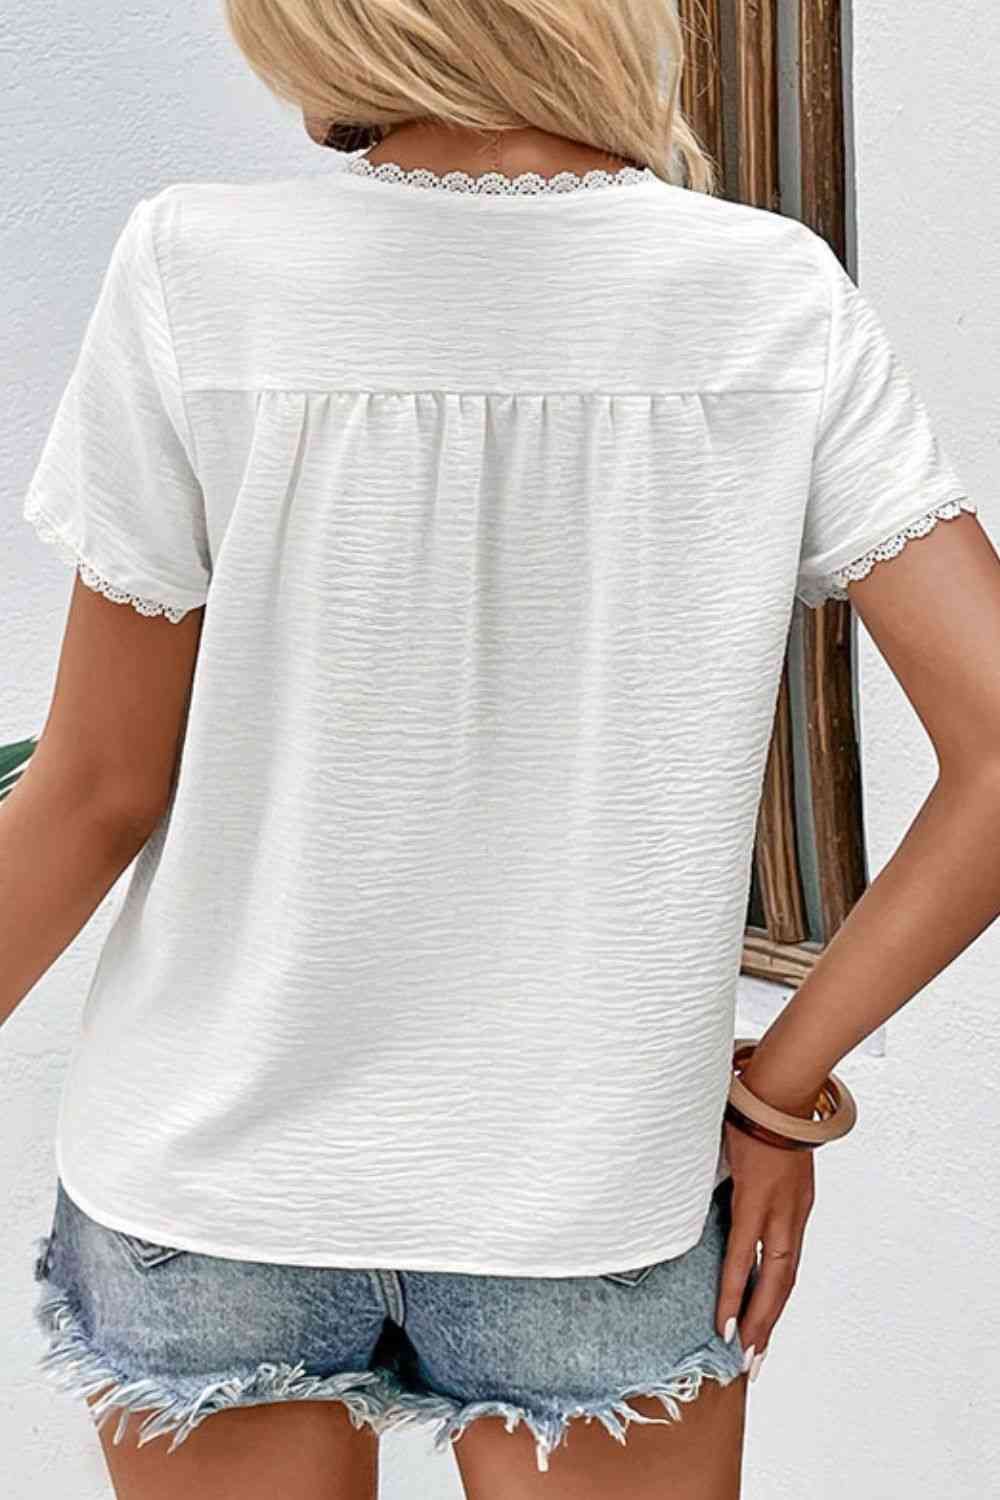 Textured Lace Trim Tee Shirt-Hundredth, Ship From Overseas-White-S-[option4]-[option5]-[option6]-Womens-USA-Clothing-Boutique-Shop-Online-Clothes Minded